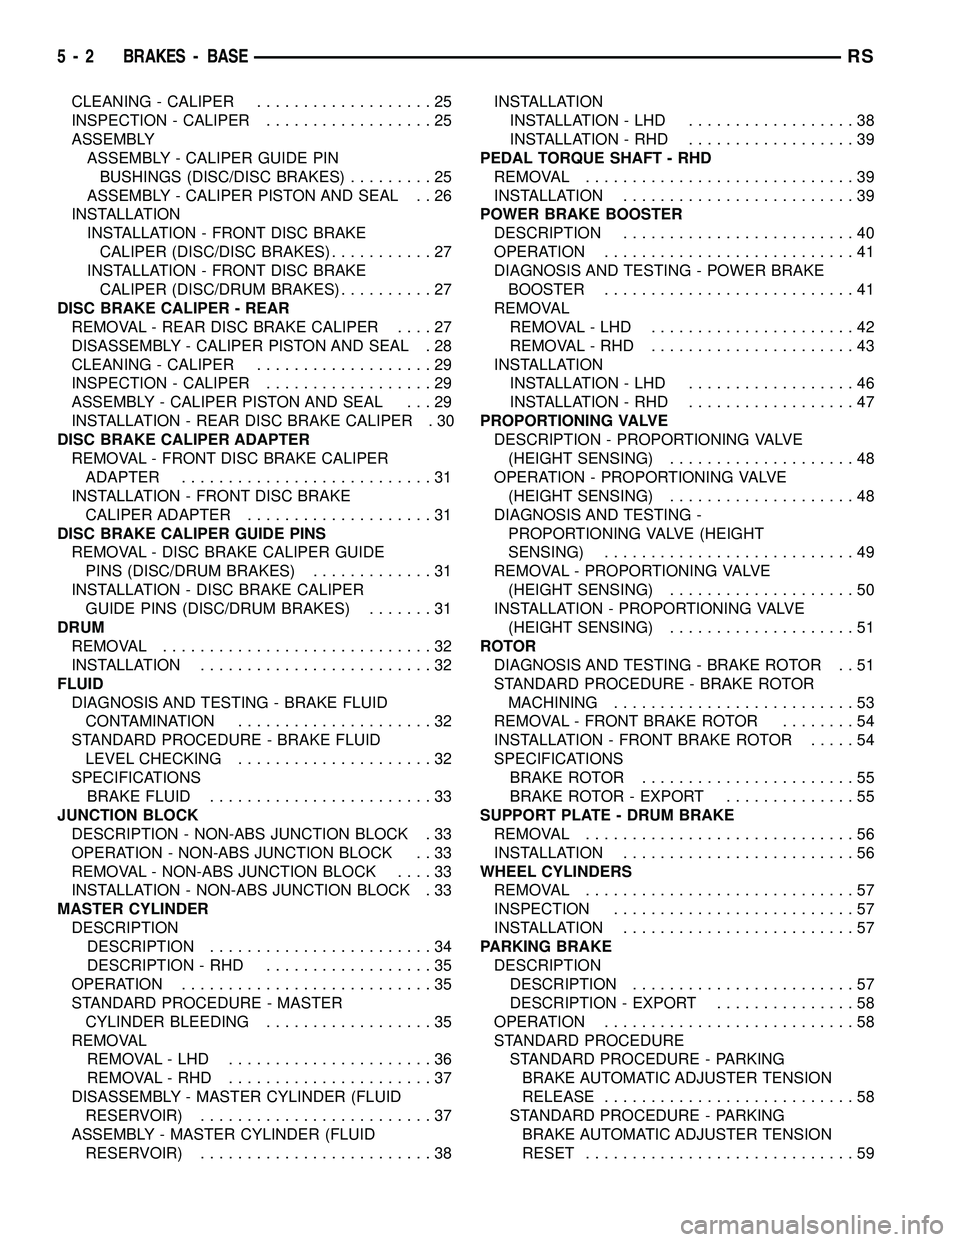 CHRYSLER VOYAGER 2004  Service Manual CLEANING - CALIPER...................25
INSPECTION - CALIPER..................25
ASSEMBLY
ASSEMBLY - CALIPER GUIDE PIN
BUSHINGS (DISC/DISC BRAKES).........25
ASSEMBLY - CALIPER PISTON AND SEAL . . 26
